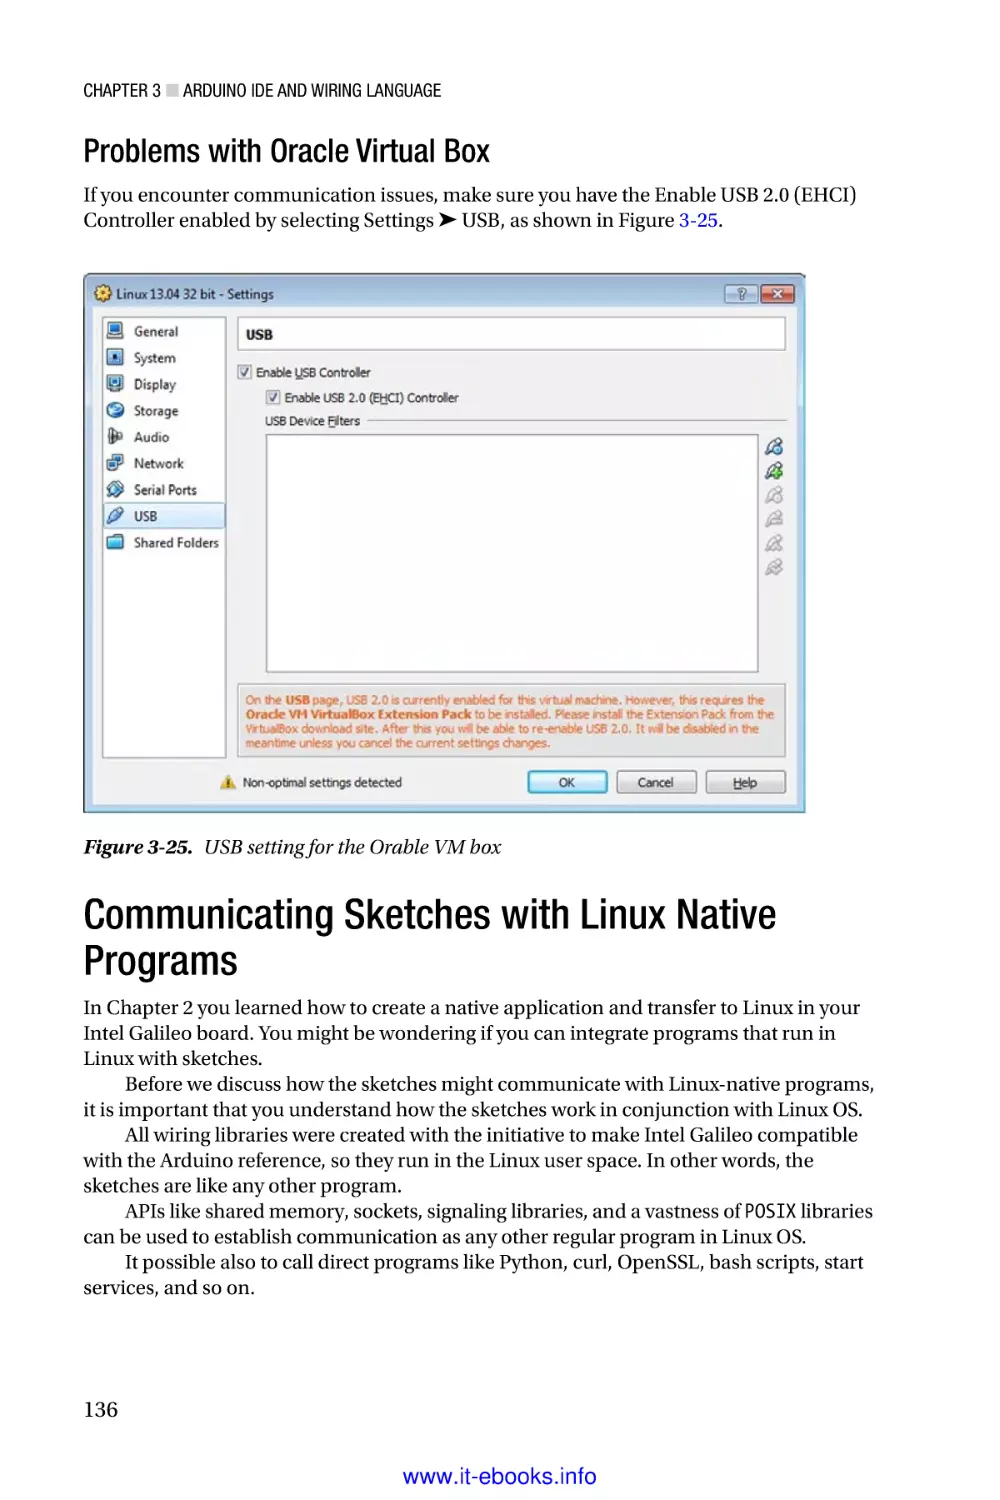 Problems with Oracle Virtual Box
Communicating Sketches with Linux Native Programs